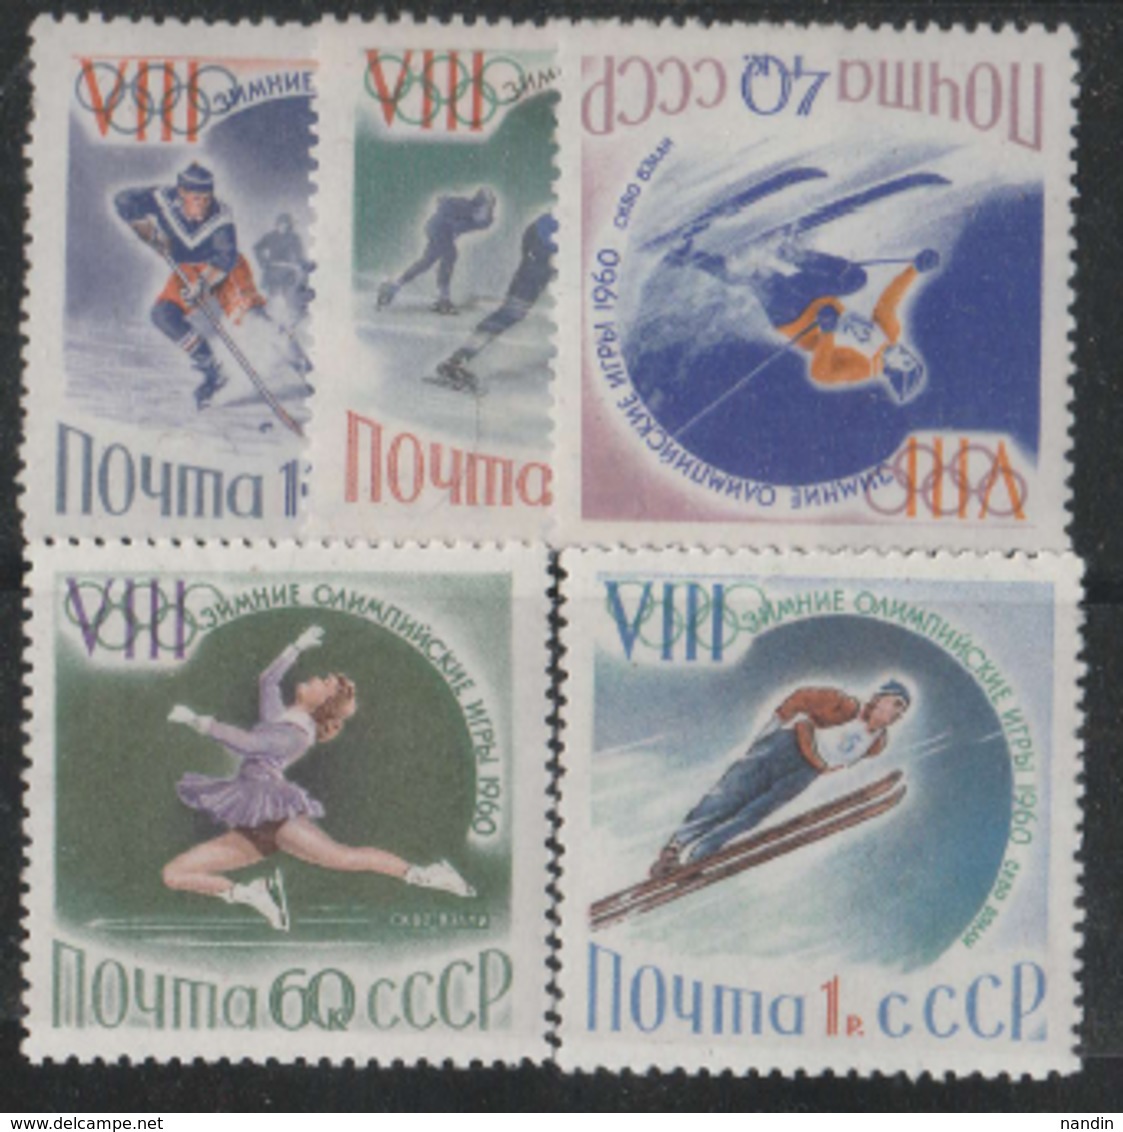 1960 WINTER OLYMPIC SQUAW VALLEY.UNUSED STAMPS FROM RUSSIA/SPORTS/ - Inverno1960: Squaw Valley